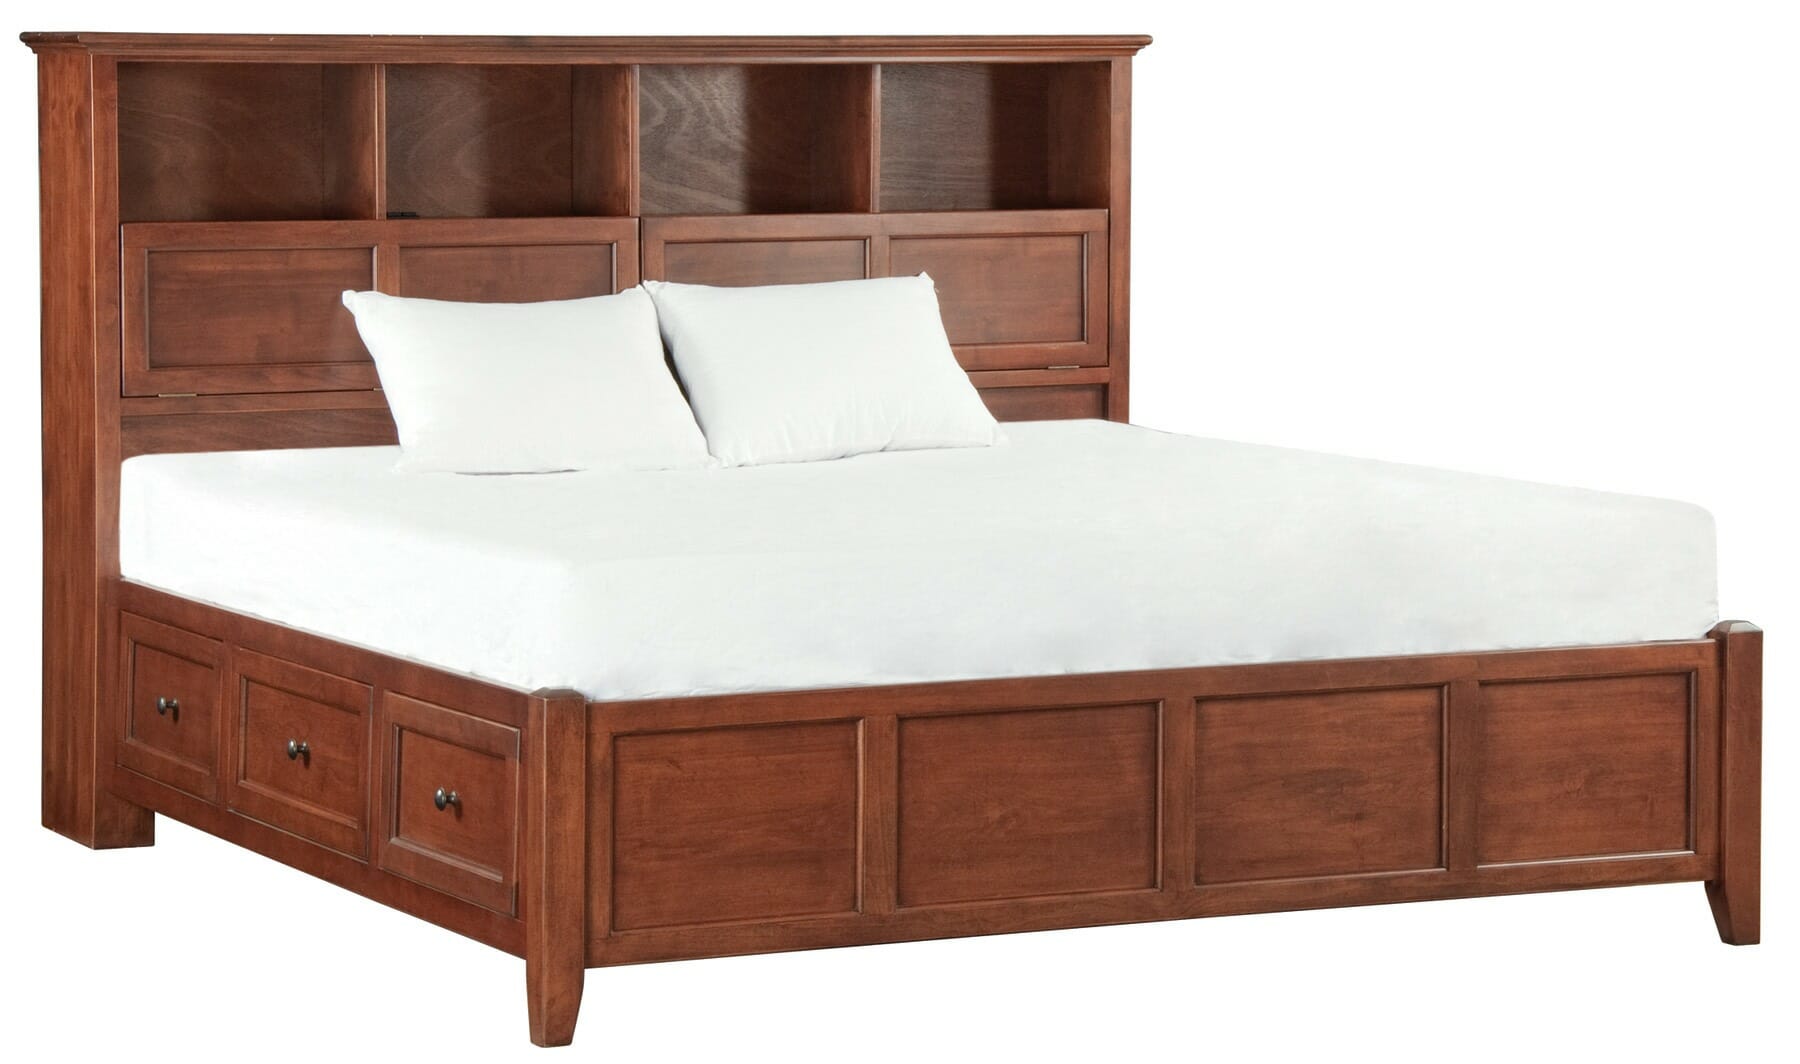 1375 Mckenzie King Bookcase Storage Bed, King Bed With Bookcase Headboard And Drawers